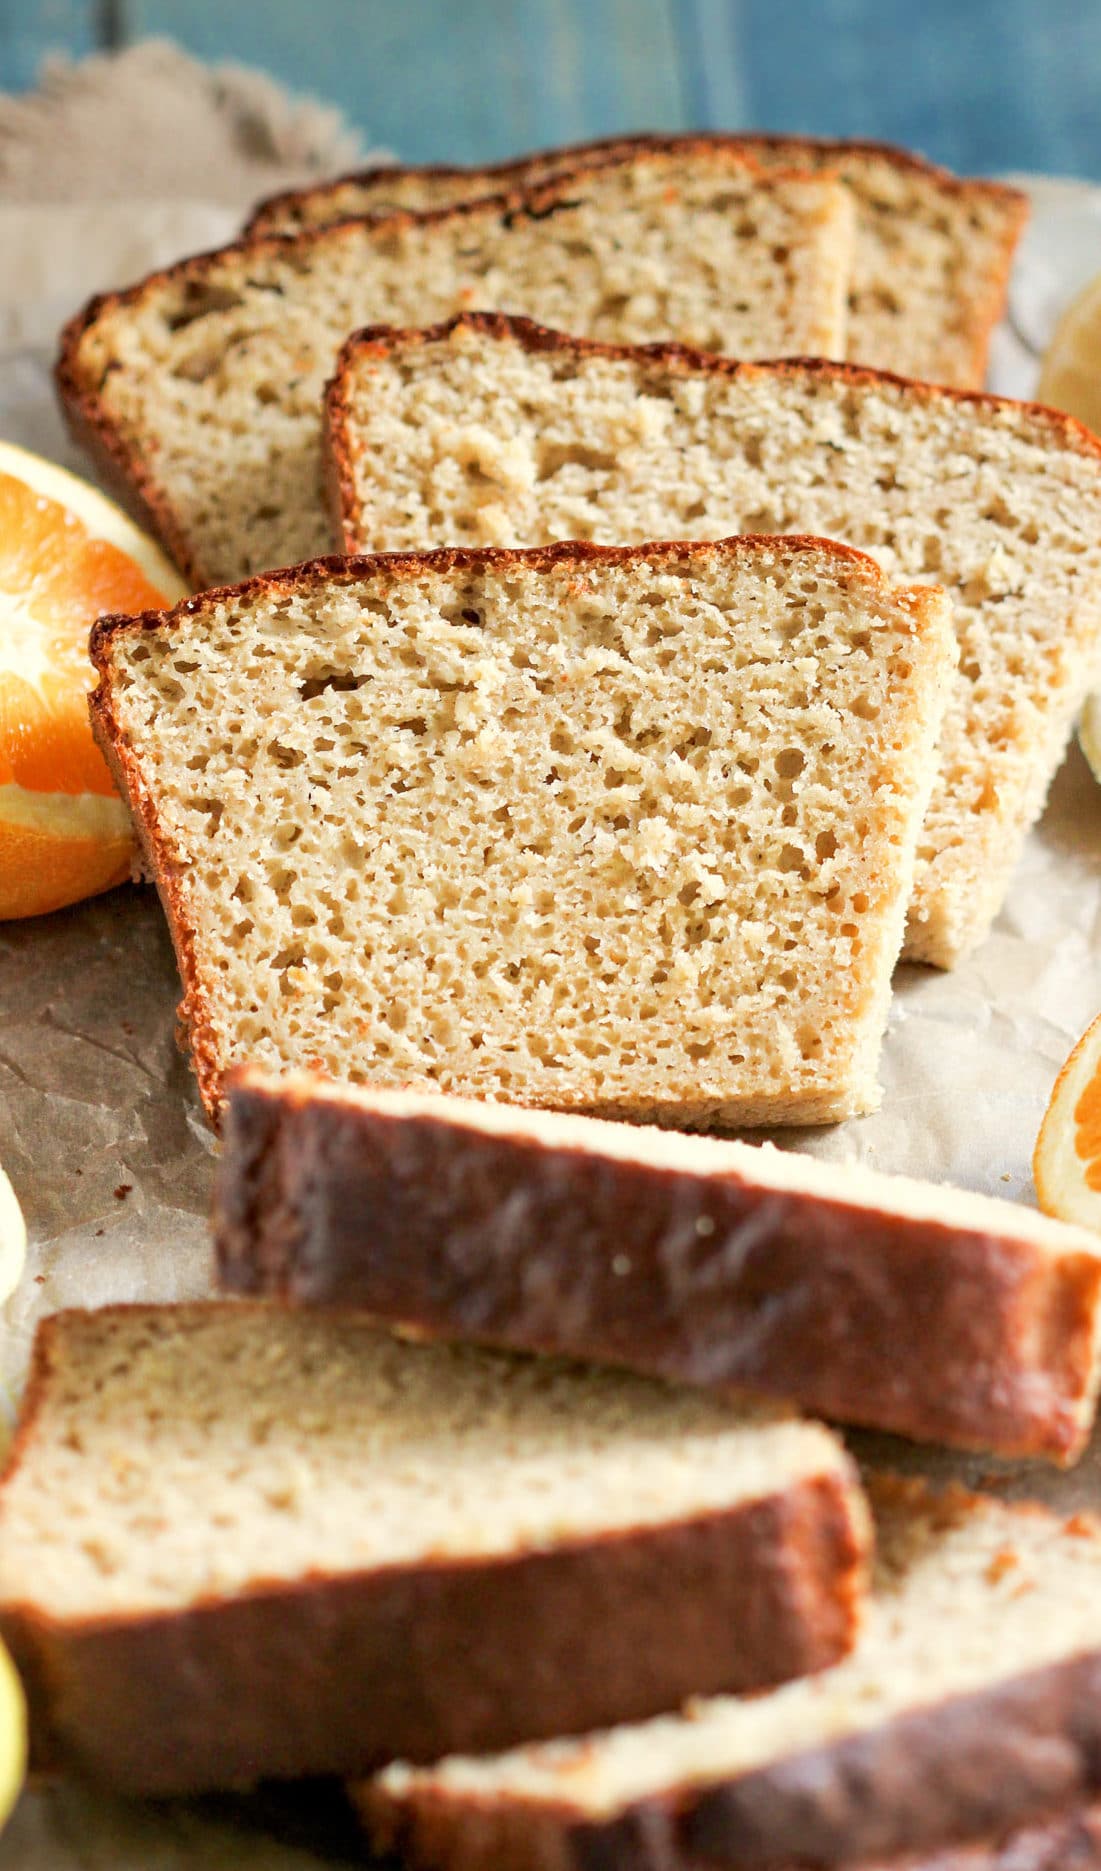 This Healthy Citrus Pound Cake is sweet, buttery, moist, and full of lemon and orange flavor. You'd never know it's made without the butter, refined sugar, and white flour. This cake is sugar free, high protein, and whole grain! Healthy Dessert Recipes with low calorie, low fat, low carb, high protein, gluten free, dairy free, vegan, and raw options at the Desserts With Benefits Blog (www.DessertsWithBenefits.com)